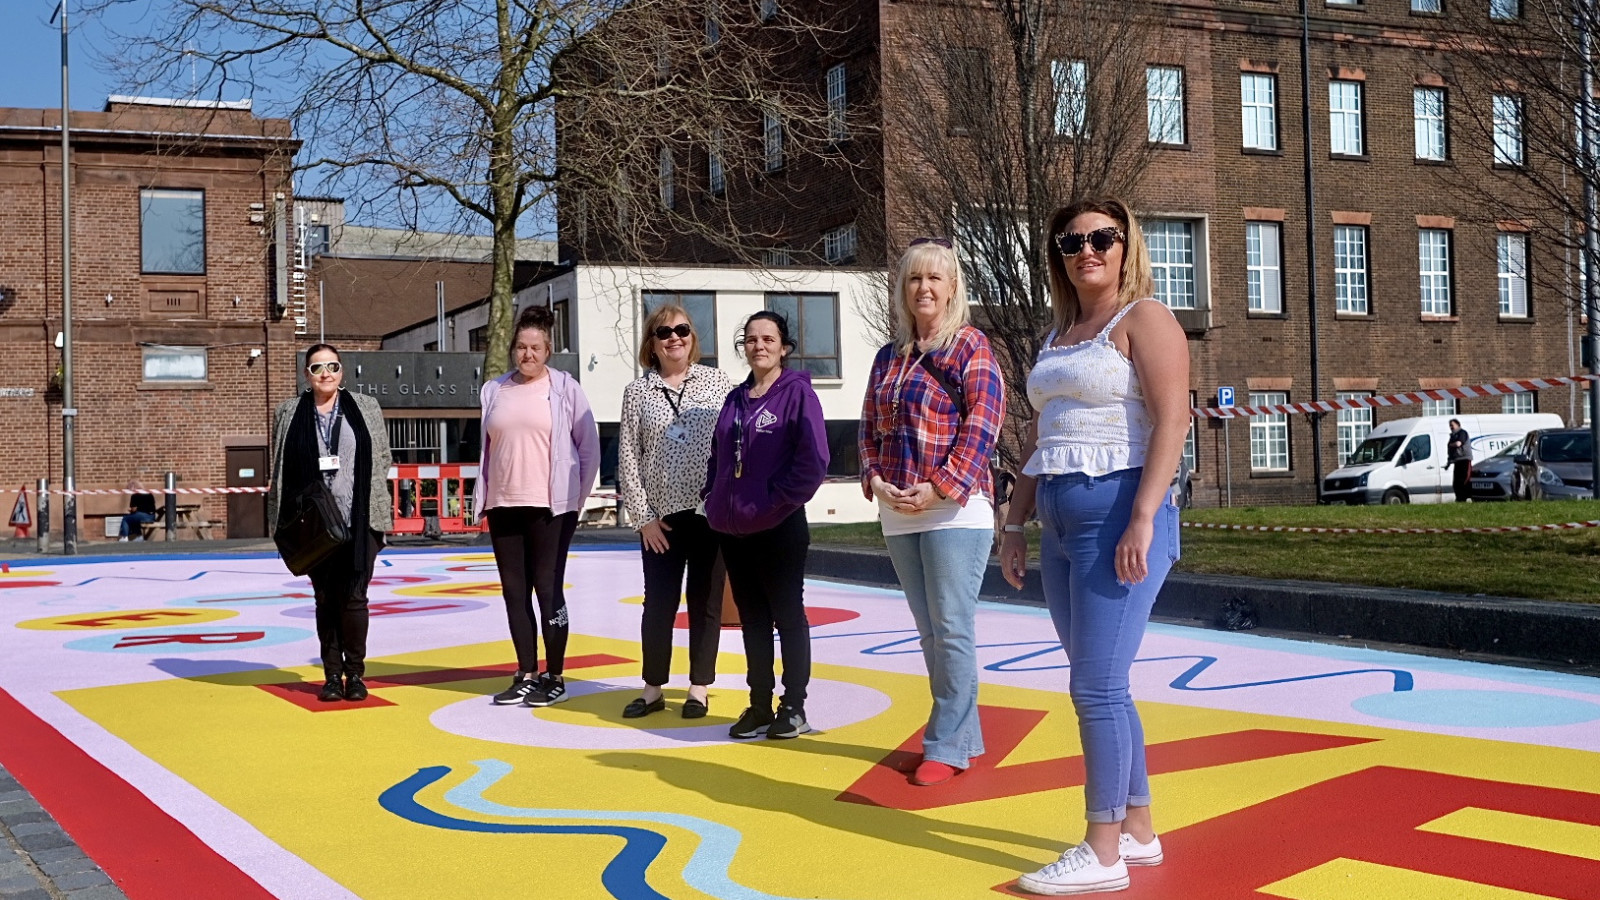 A group of women of different ages stand together on a bold and bright floor mural. You can read the word 'love' under their feet.